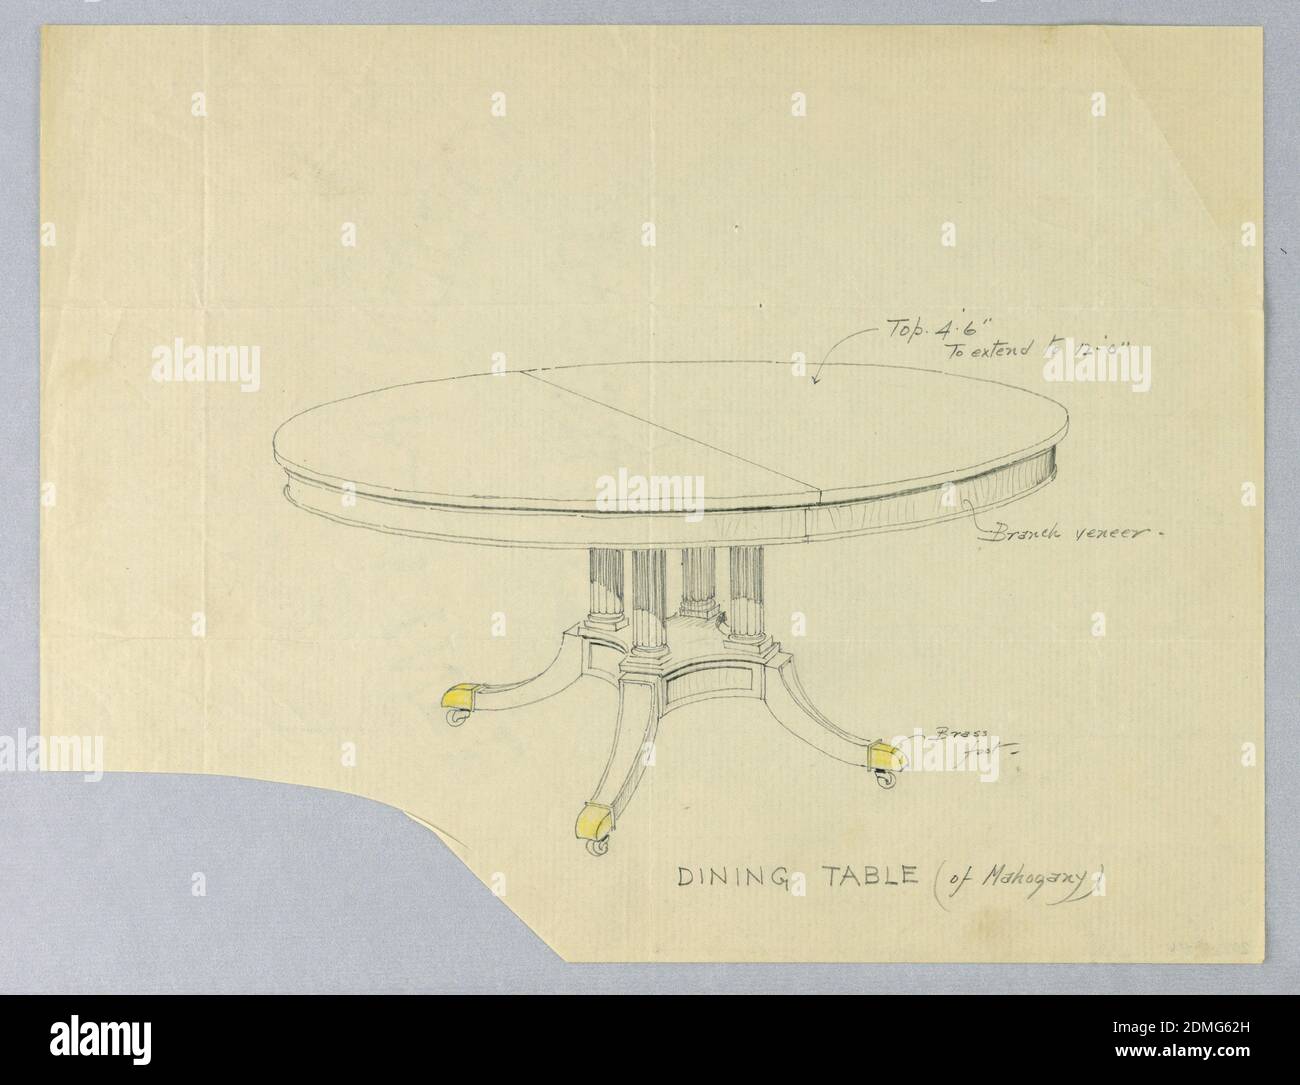 Design for Dining Table of Mahogany on Column-Like Supports, A.N. Davenport Co., Graphite and yellow color pencil on thin, cream paper, Round molded top with a dividing stretcher at center is raised on four reeded column-like supports sitting on molded rectangular basae terminating in four splayed legs with brass feet on casters indicated in yellow color pencil., 1900–05, furniture, Drawing Stock Photo